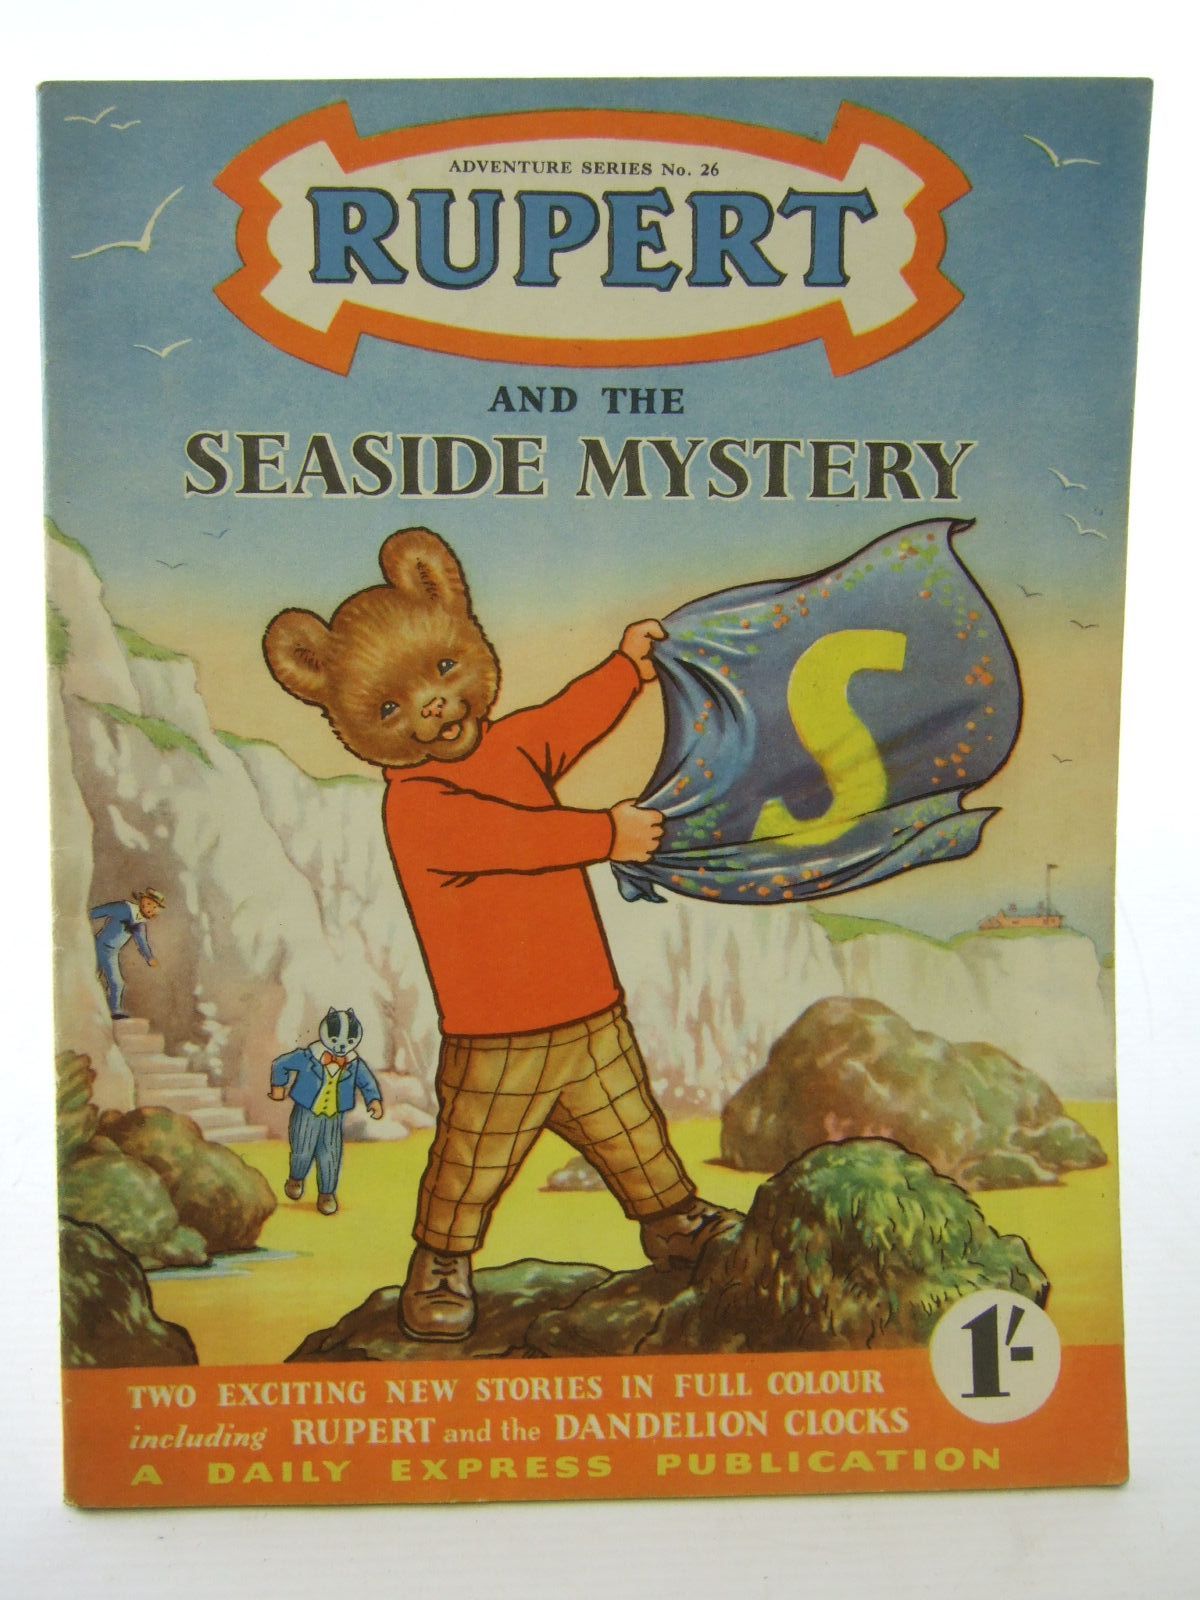 Photo of RUPERT ADVENTURE SERIES No. 26 - RUPERT AND THE SEASIDE MYSTERY written by Bestall, Alfred published by Daily Express (STOCK CODE: 1706115)  for sale by Stella & Rose's Books